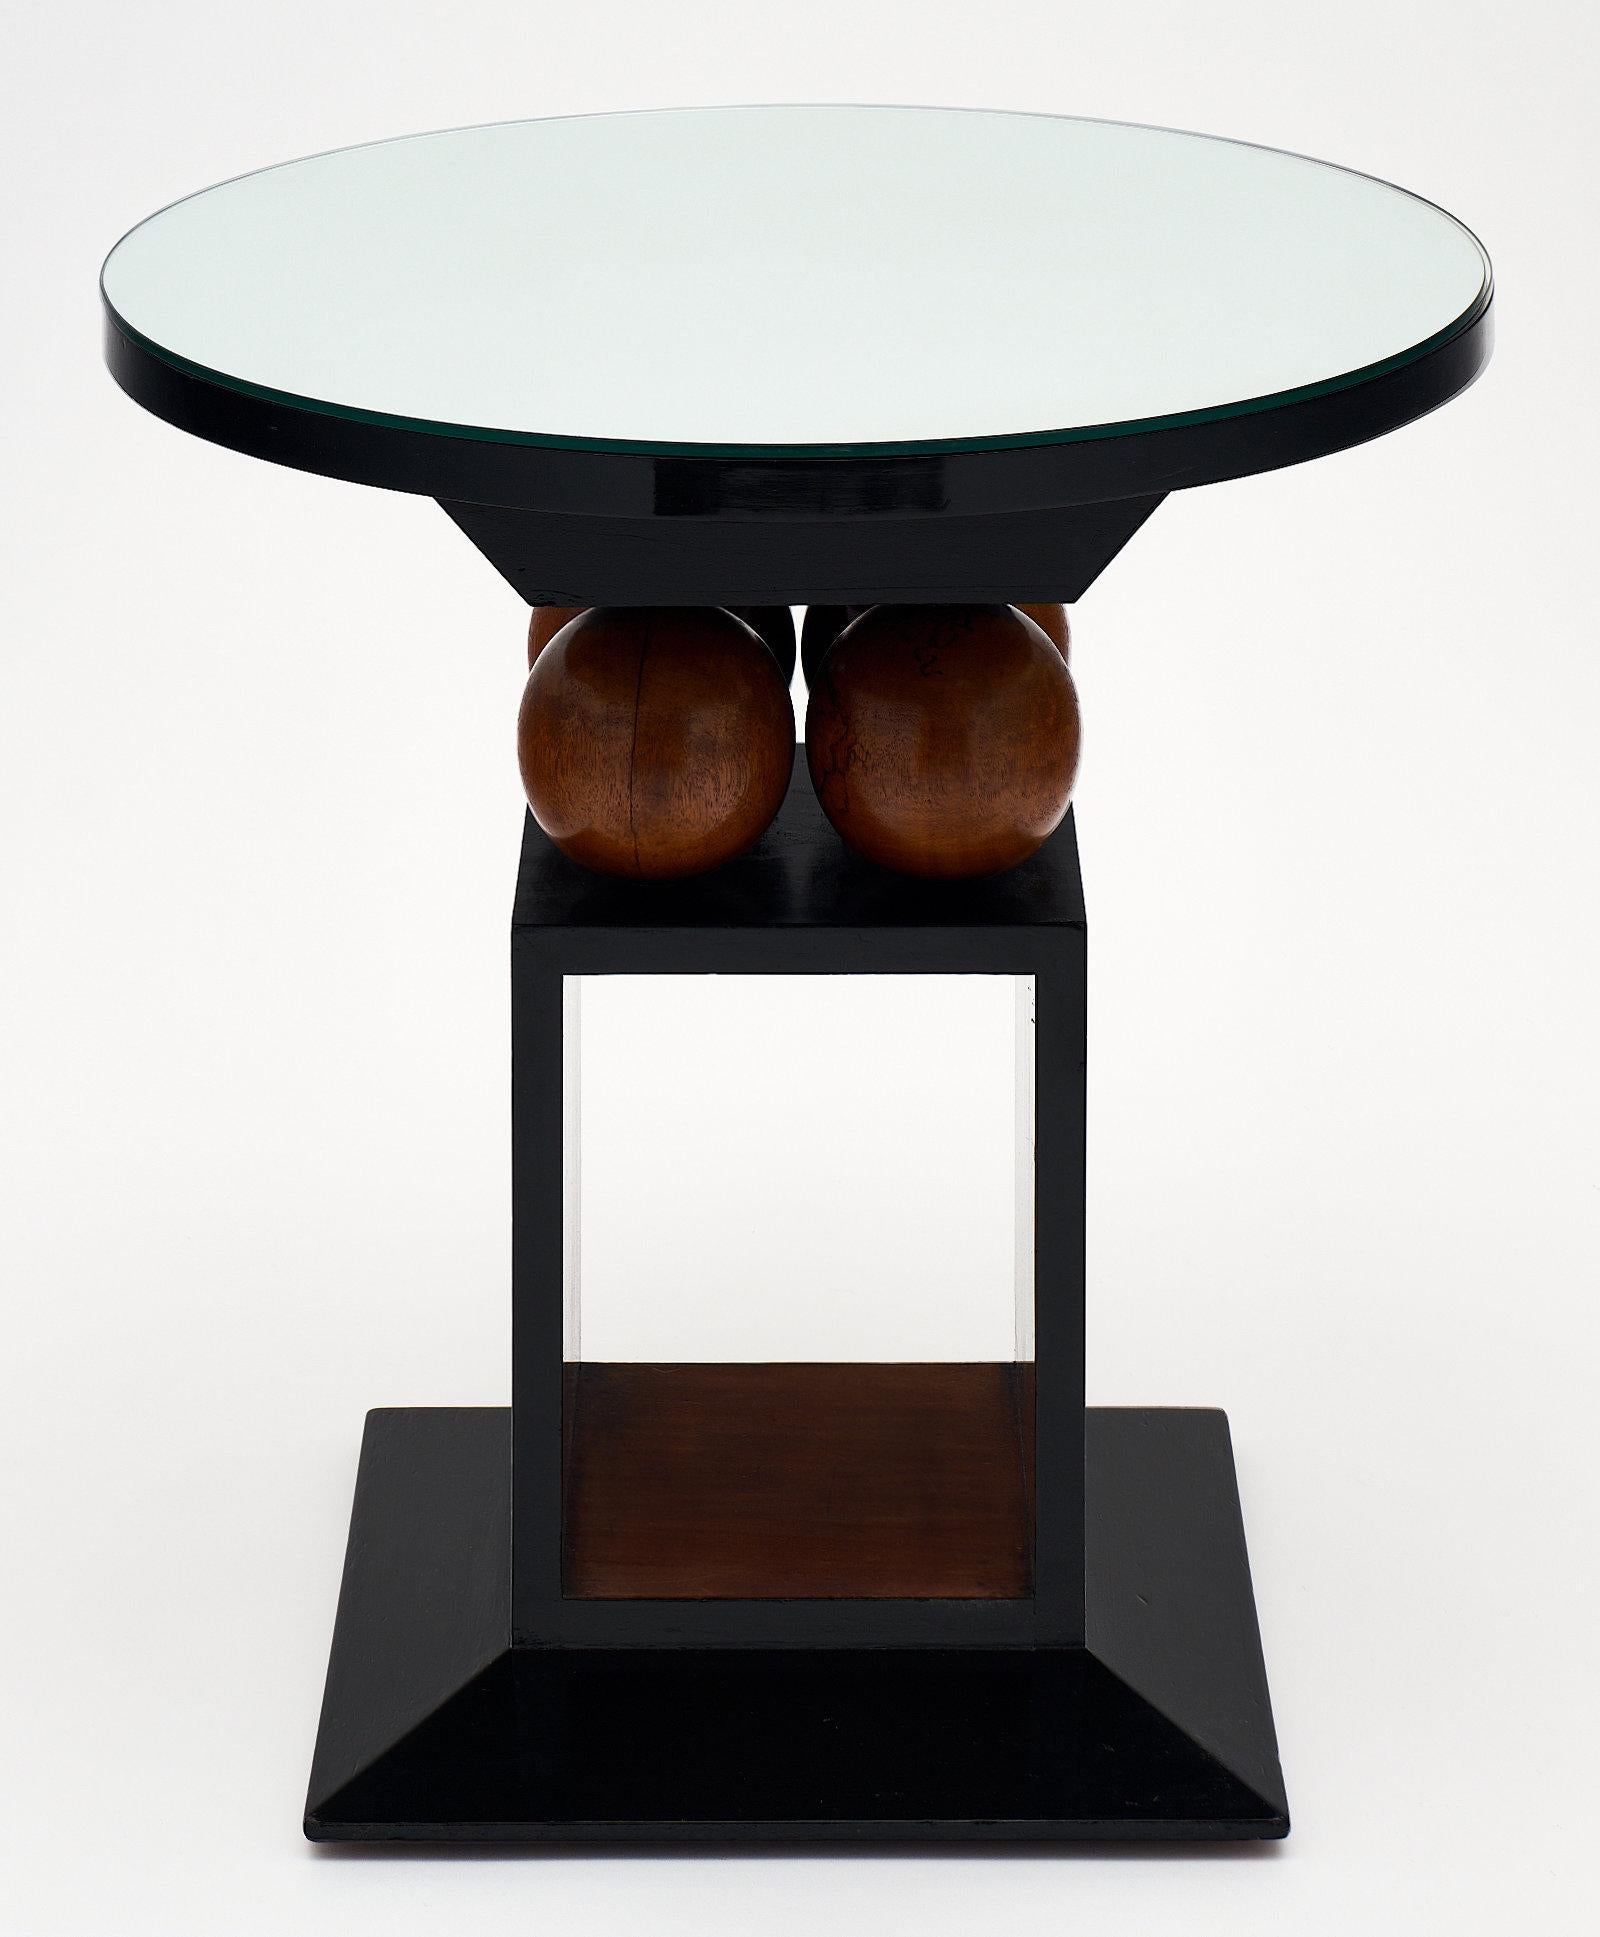 French Art Deco geometric gueridon featuring “cubist” elements. We loved the perfect balance and the beautiful walnut grain contrasting with the deep luster of the ebony French polish. Mirrored top.